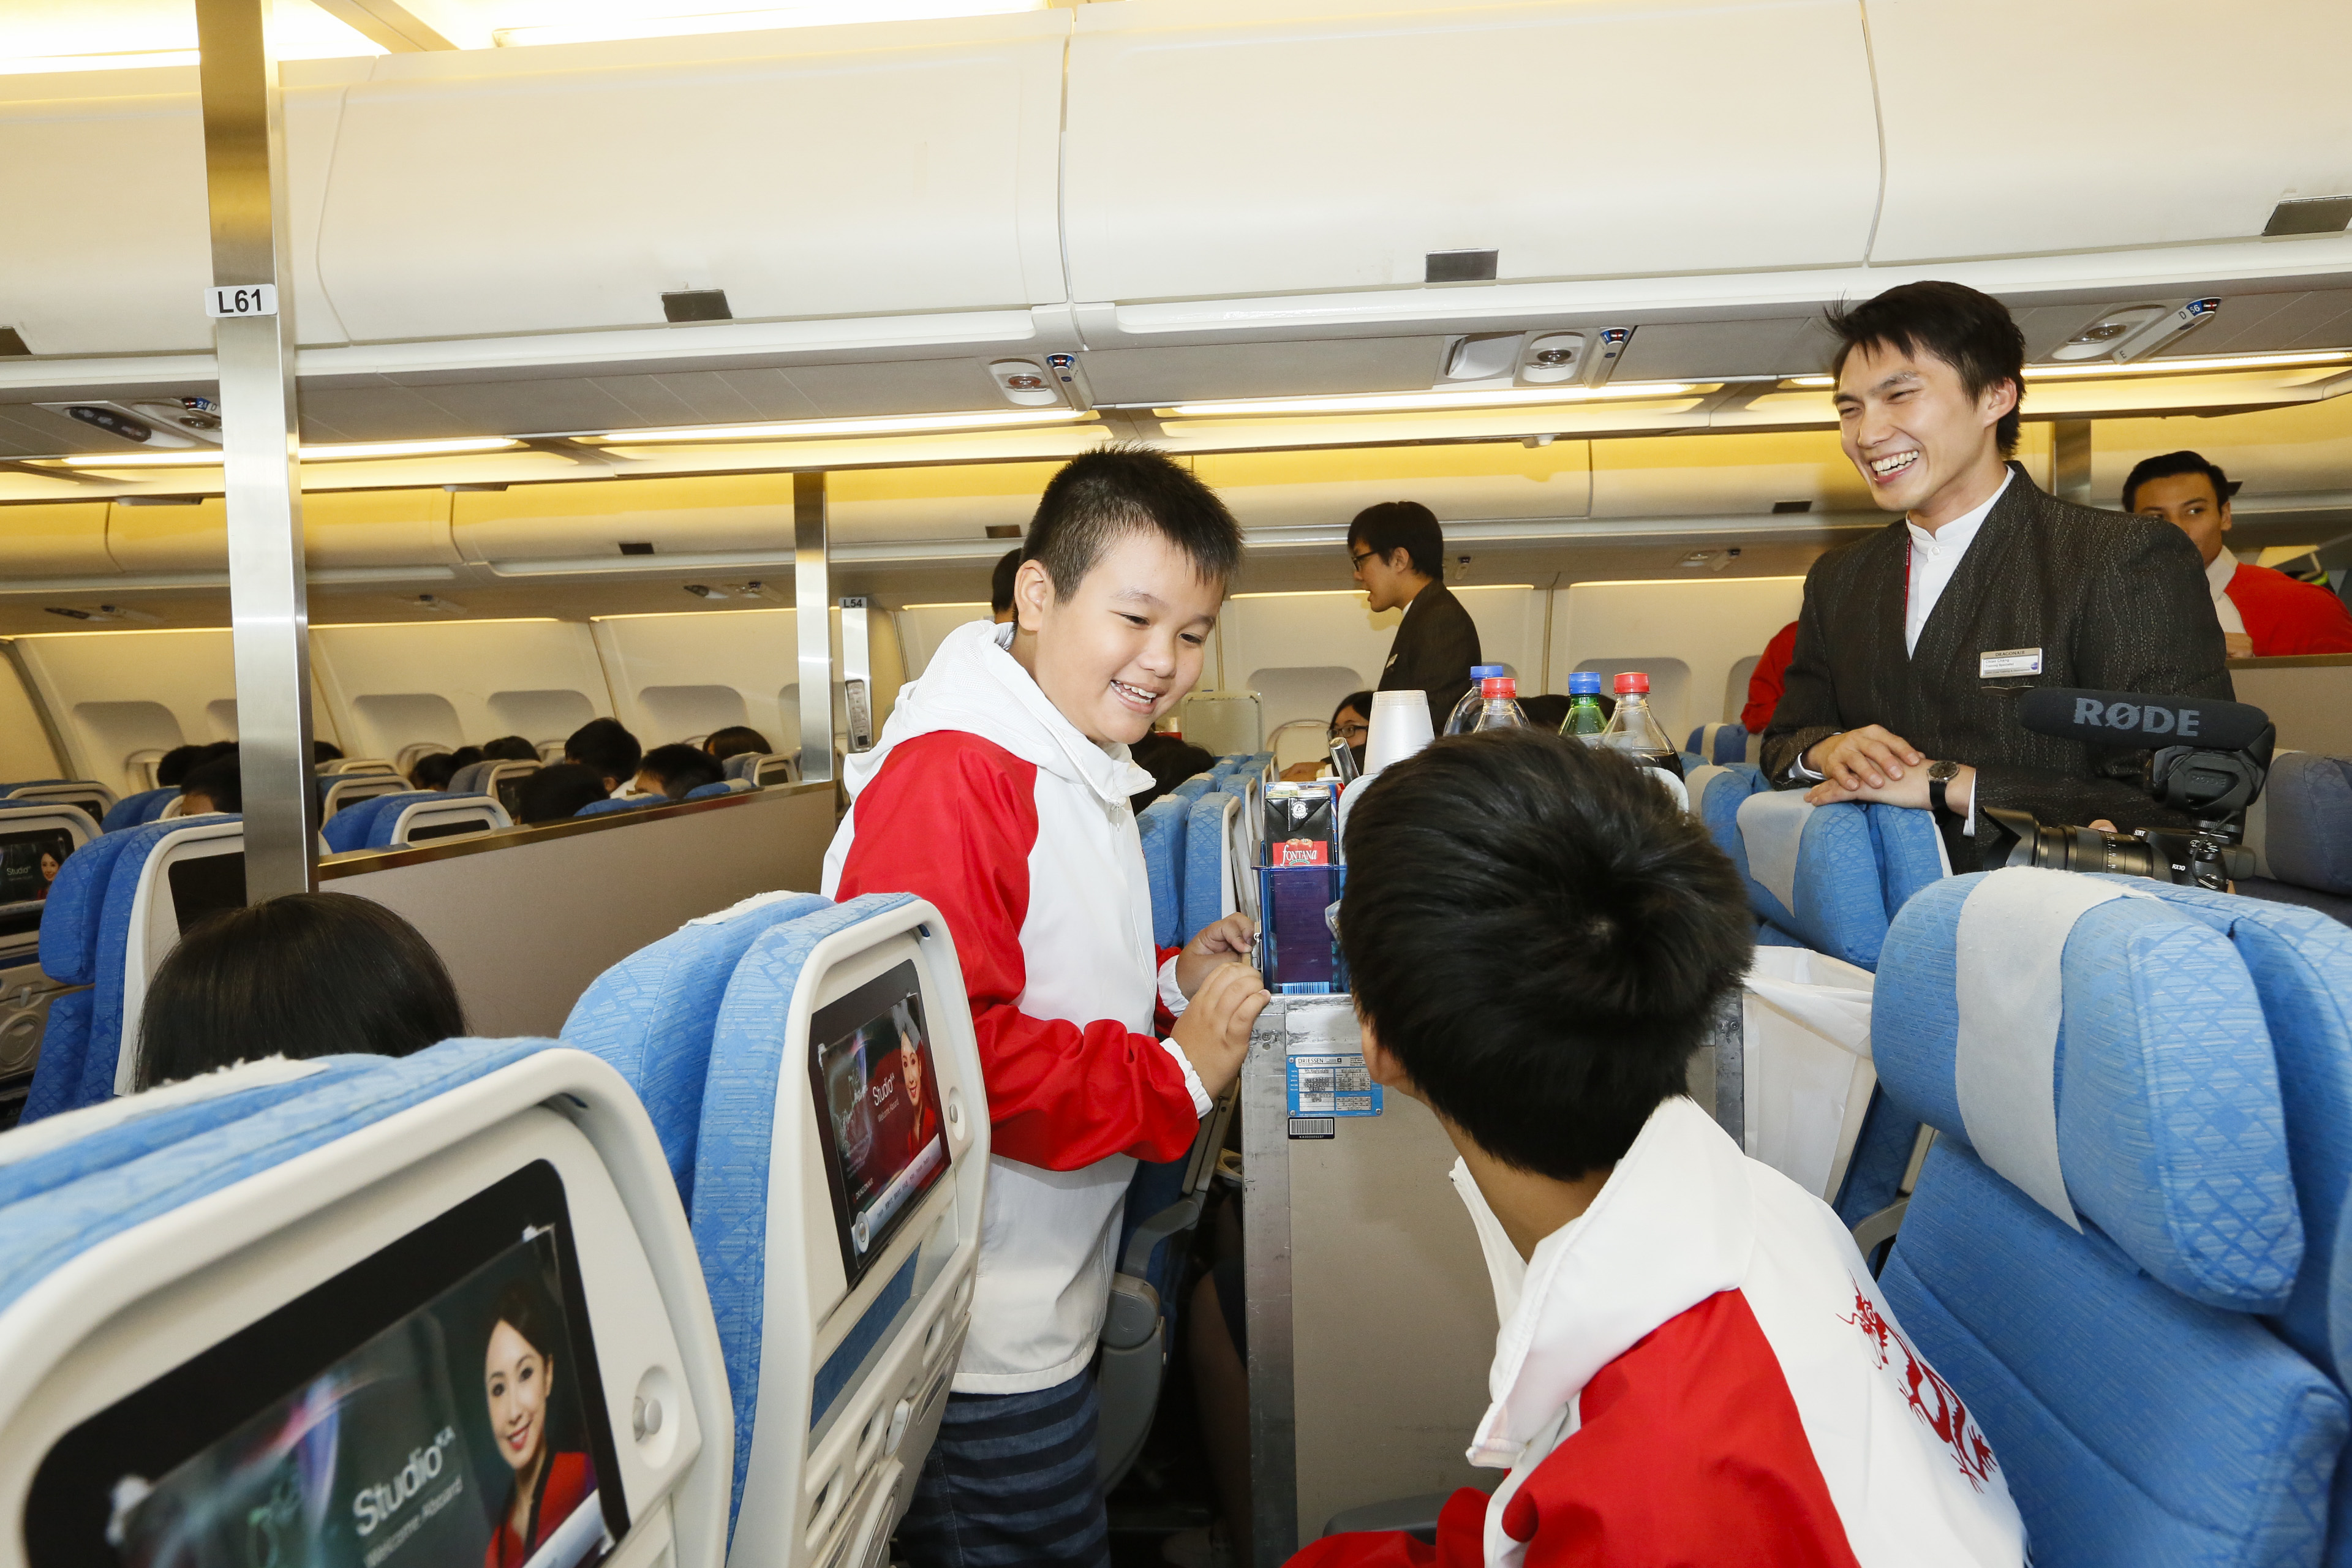 Less-advantaged youngsters took part in Dragonair “Journey of Dreams” aviation programme  